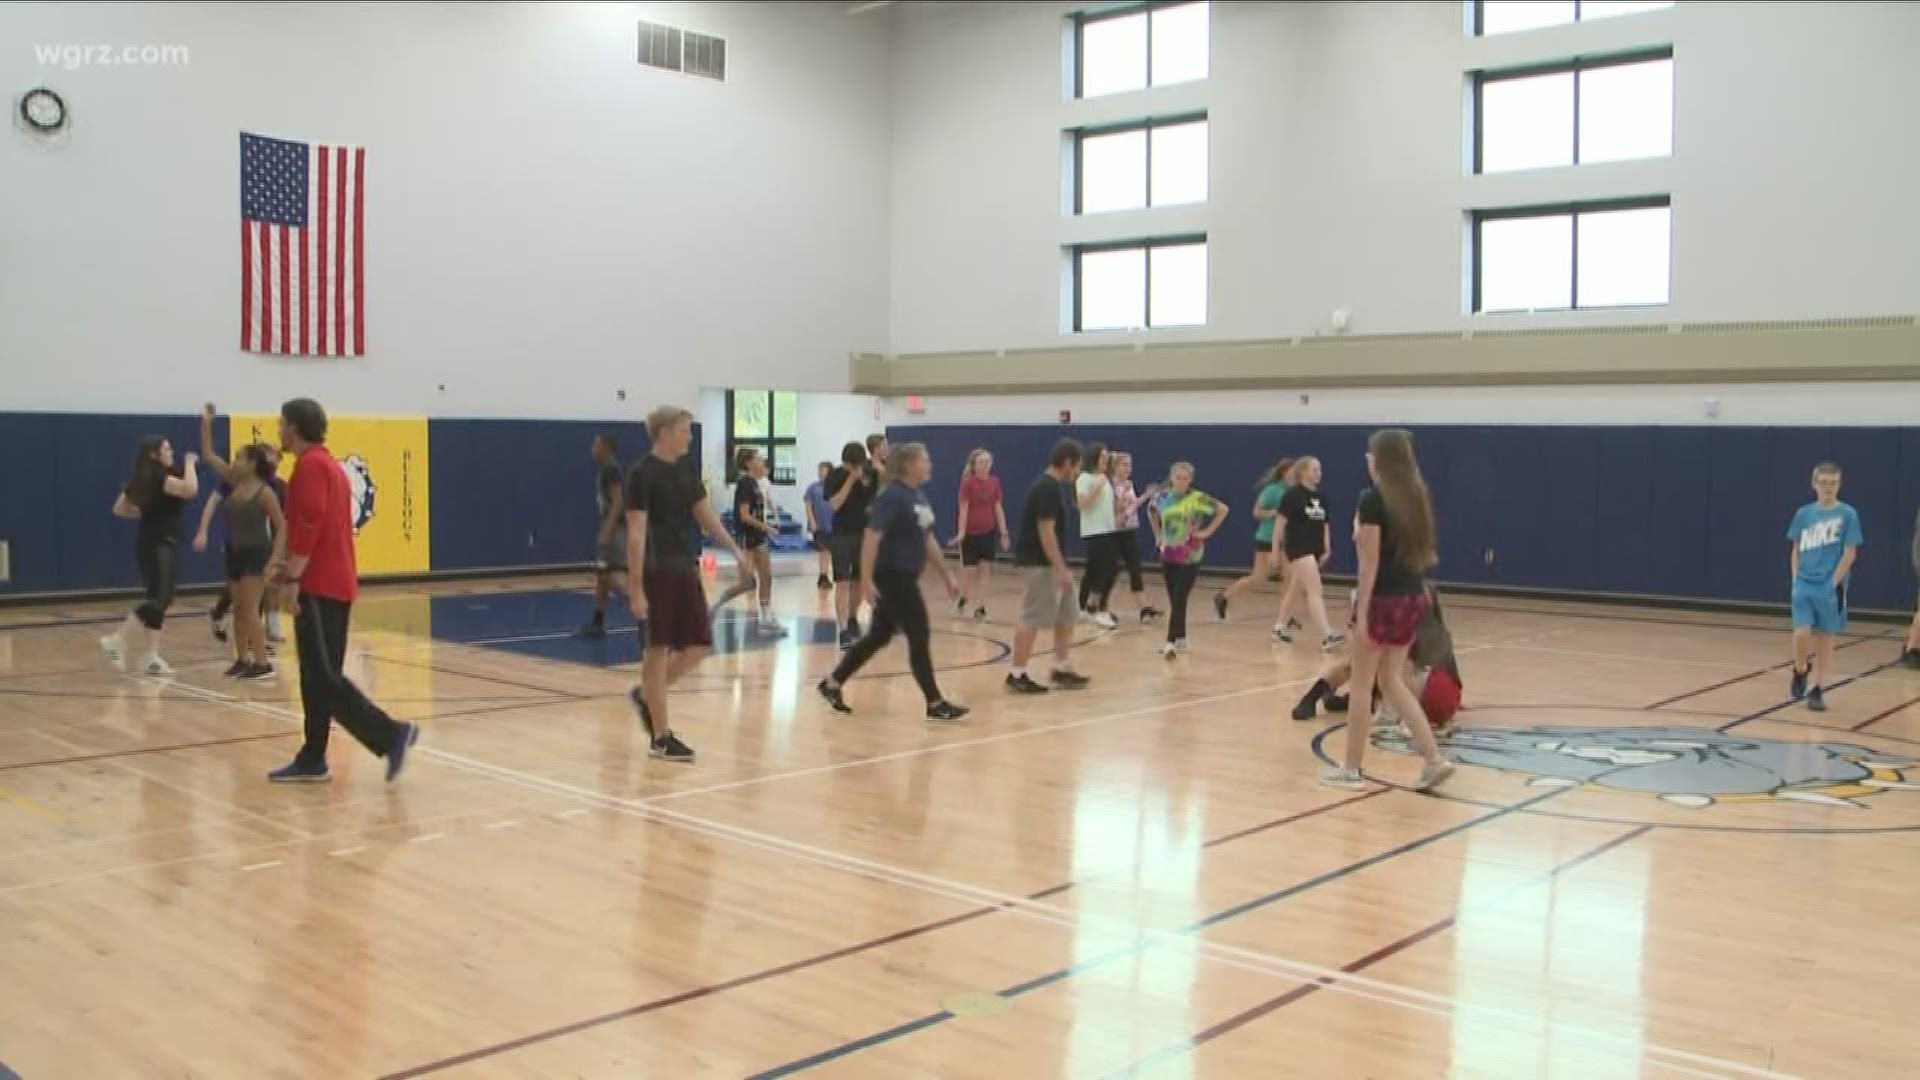 State Audit Of Physical Education In Schools